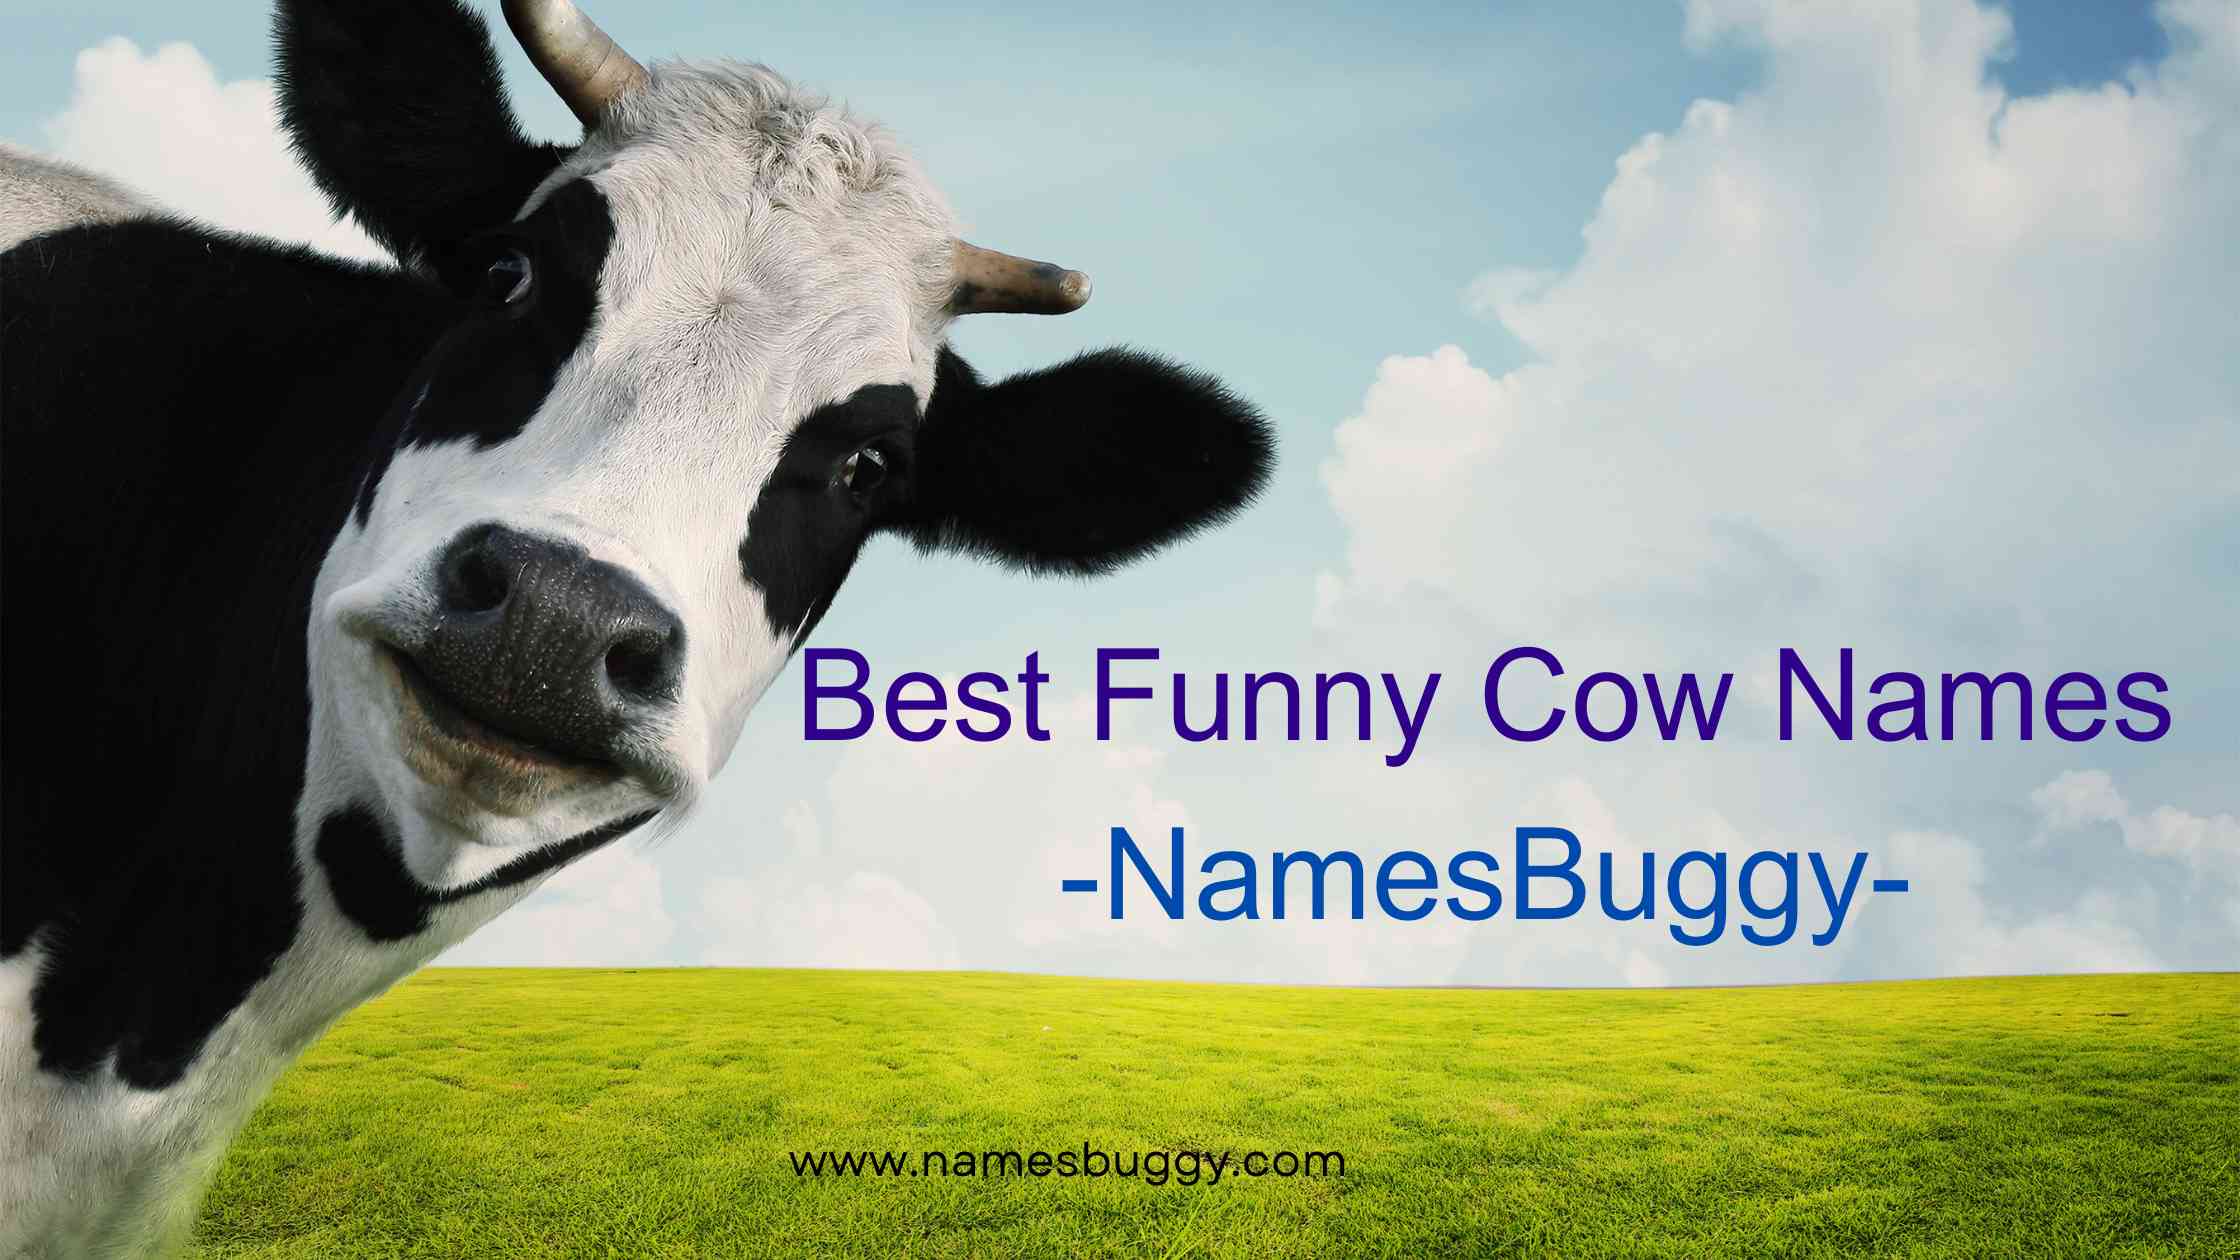 Best Funny Cow Names -NamesBuggy-